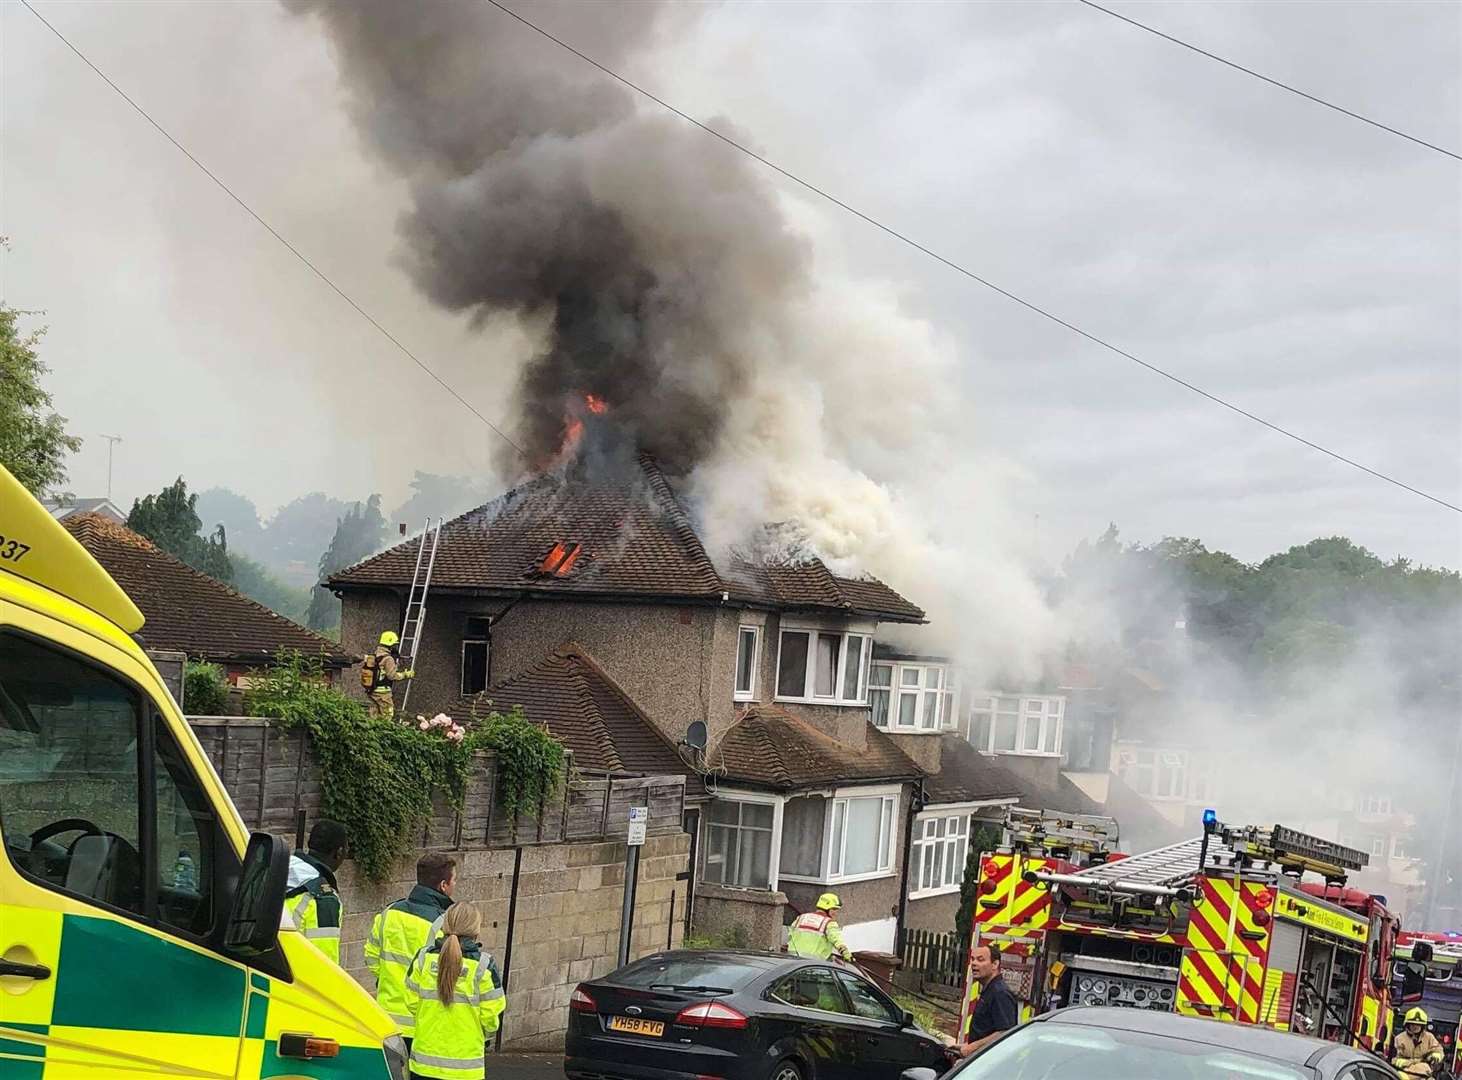 Emergency crews at the scene of a house fire in Grosvenor Avenue, Chatham (13491733)